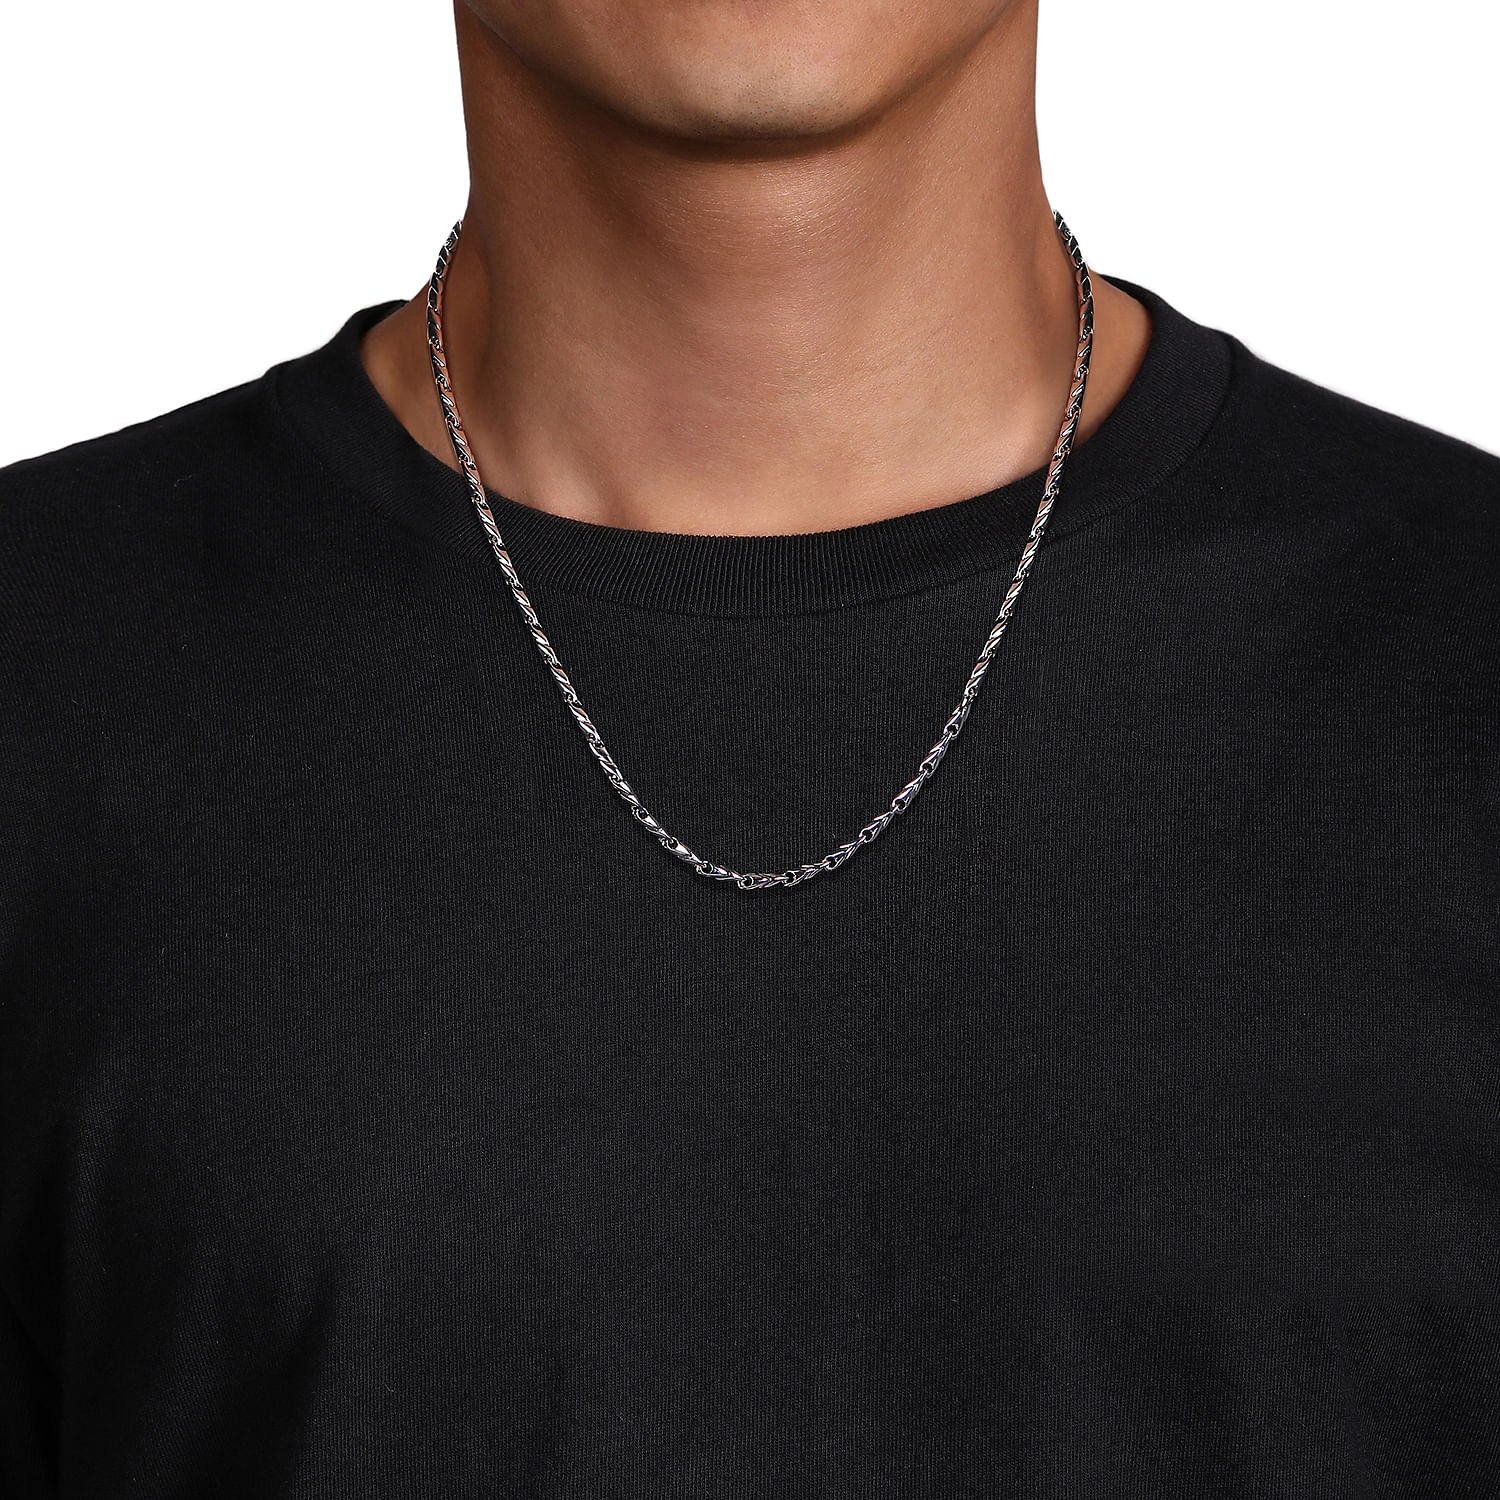 22 Inch 925 Sterling Silver Men's Chain Necklace